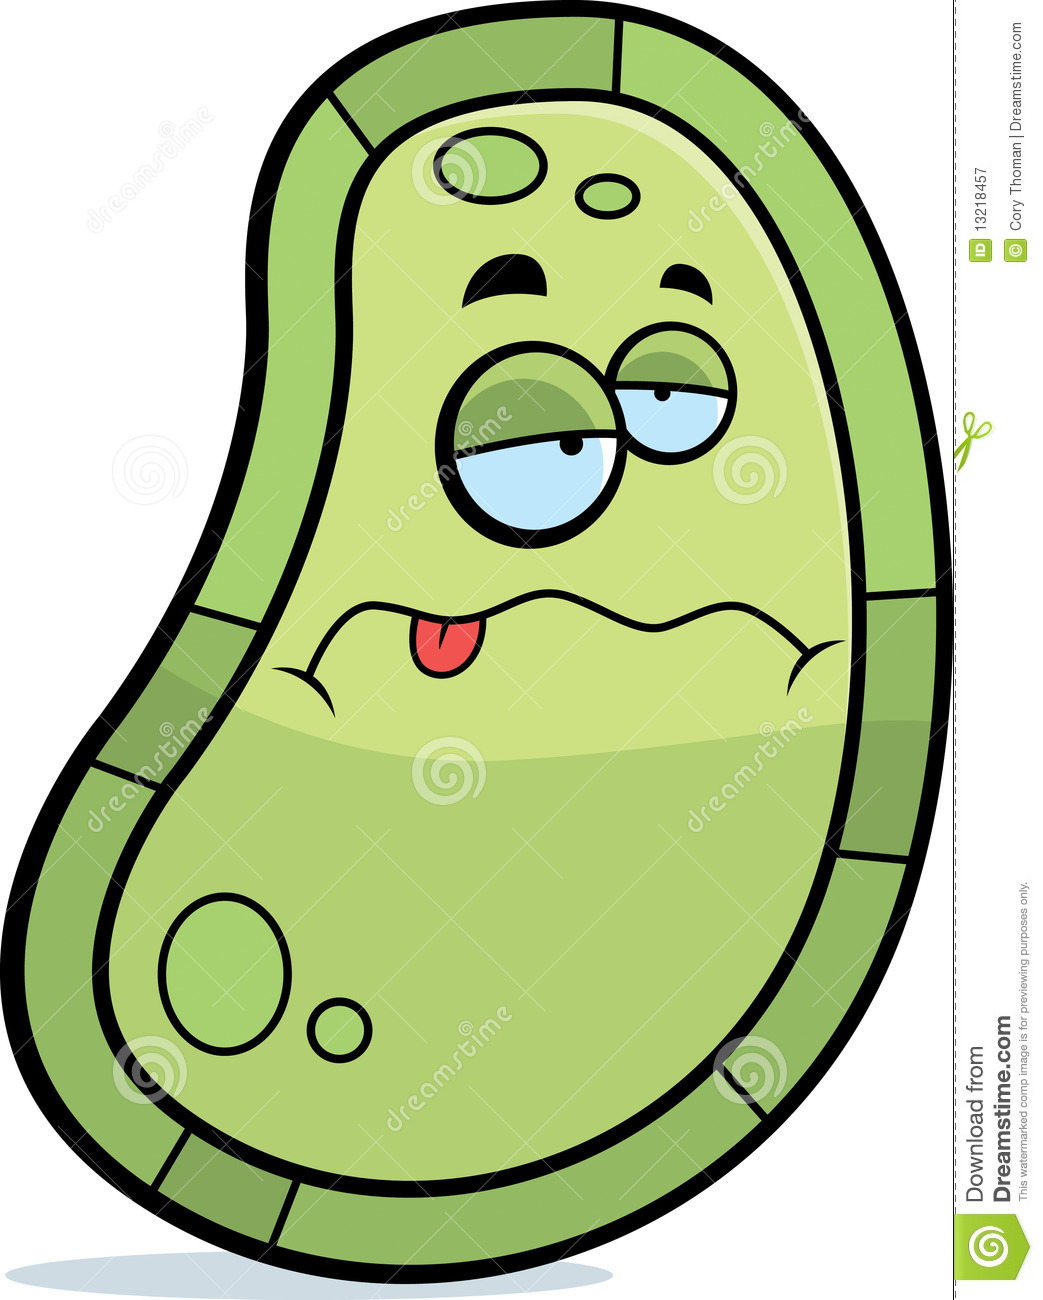 Germs clipart #9, Download drawings